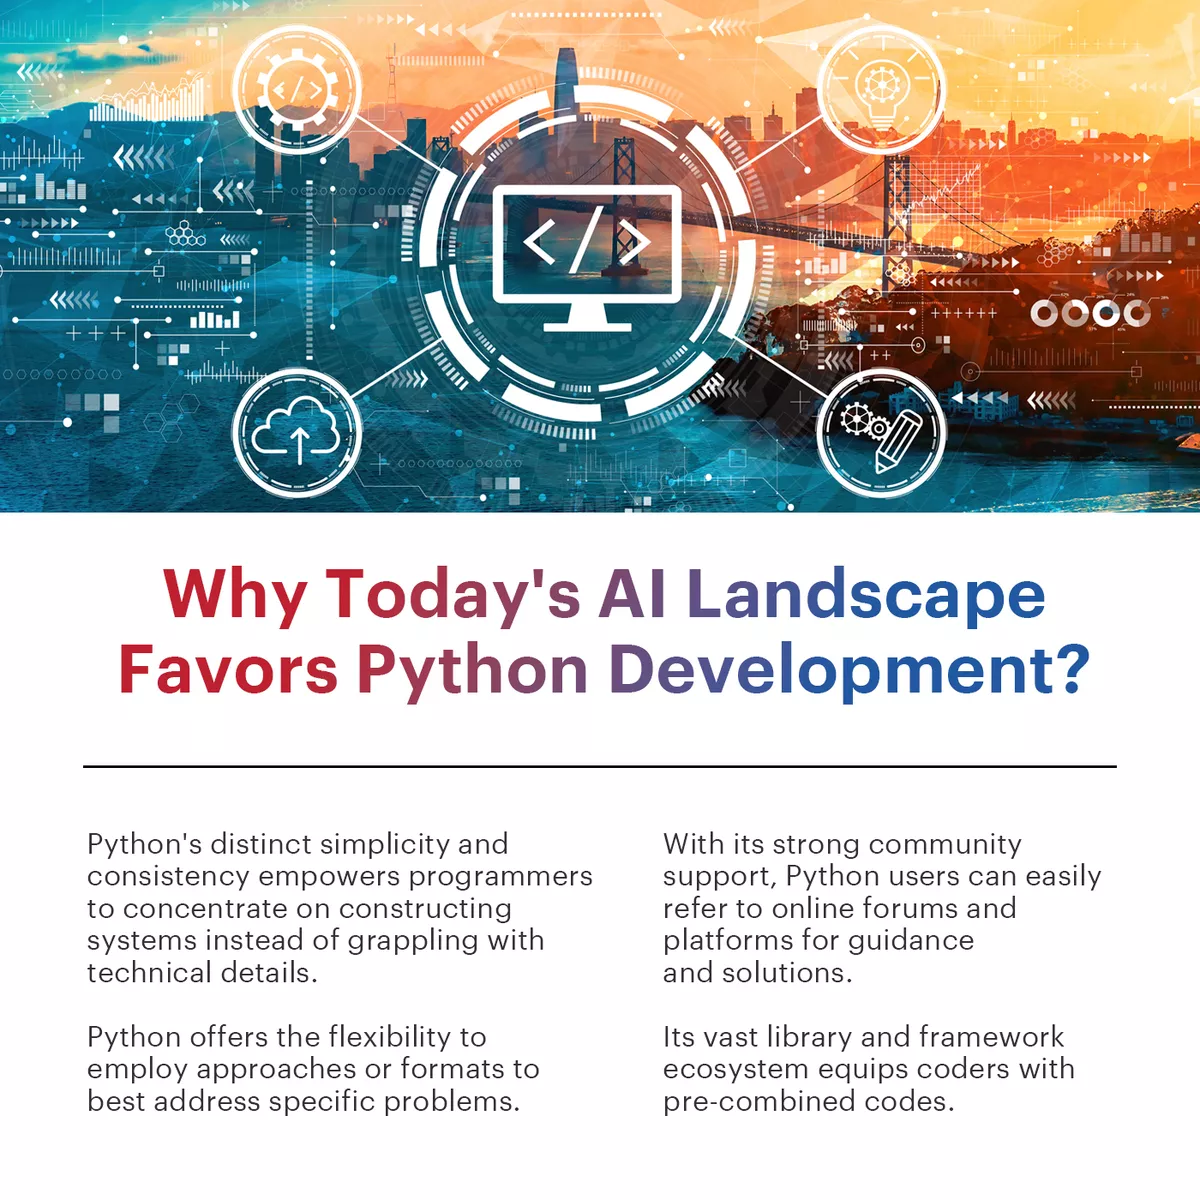 An infographic discussing why python developers are in demand in the AI landscape.